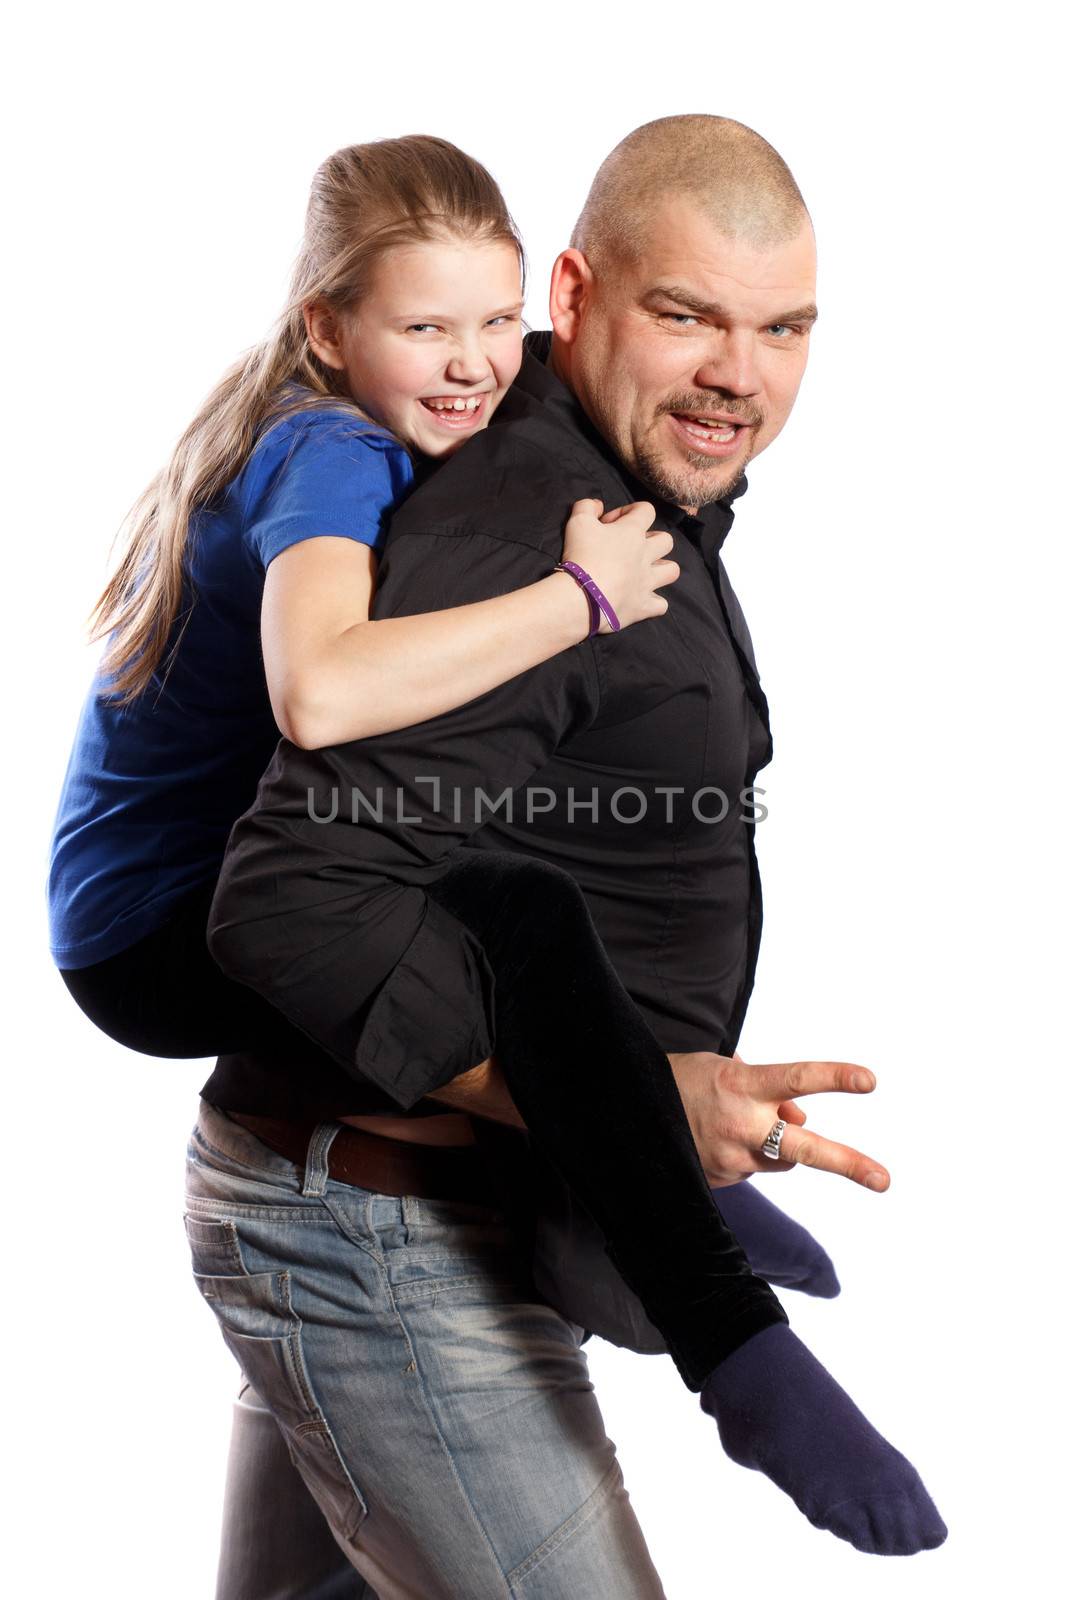  father and daughter on a white background